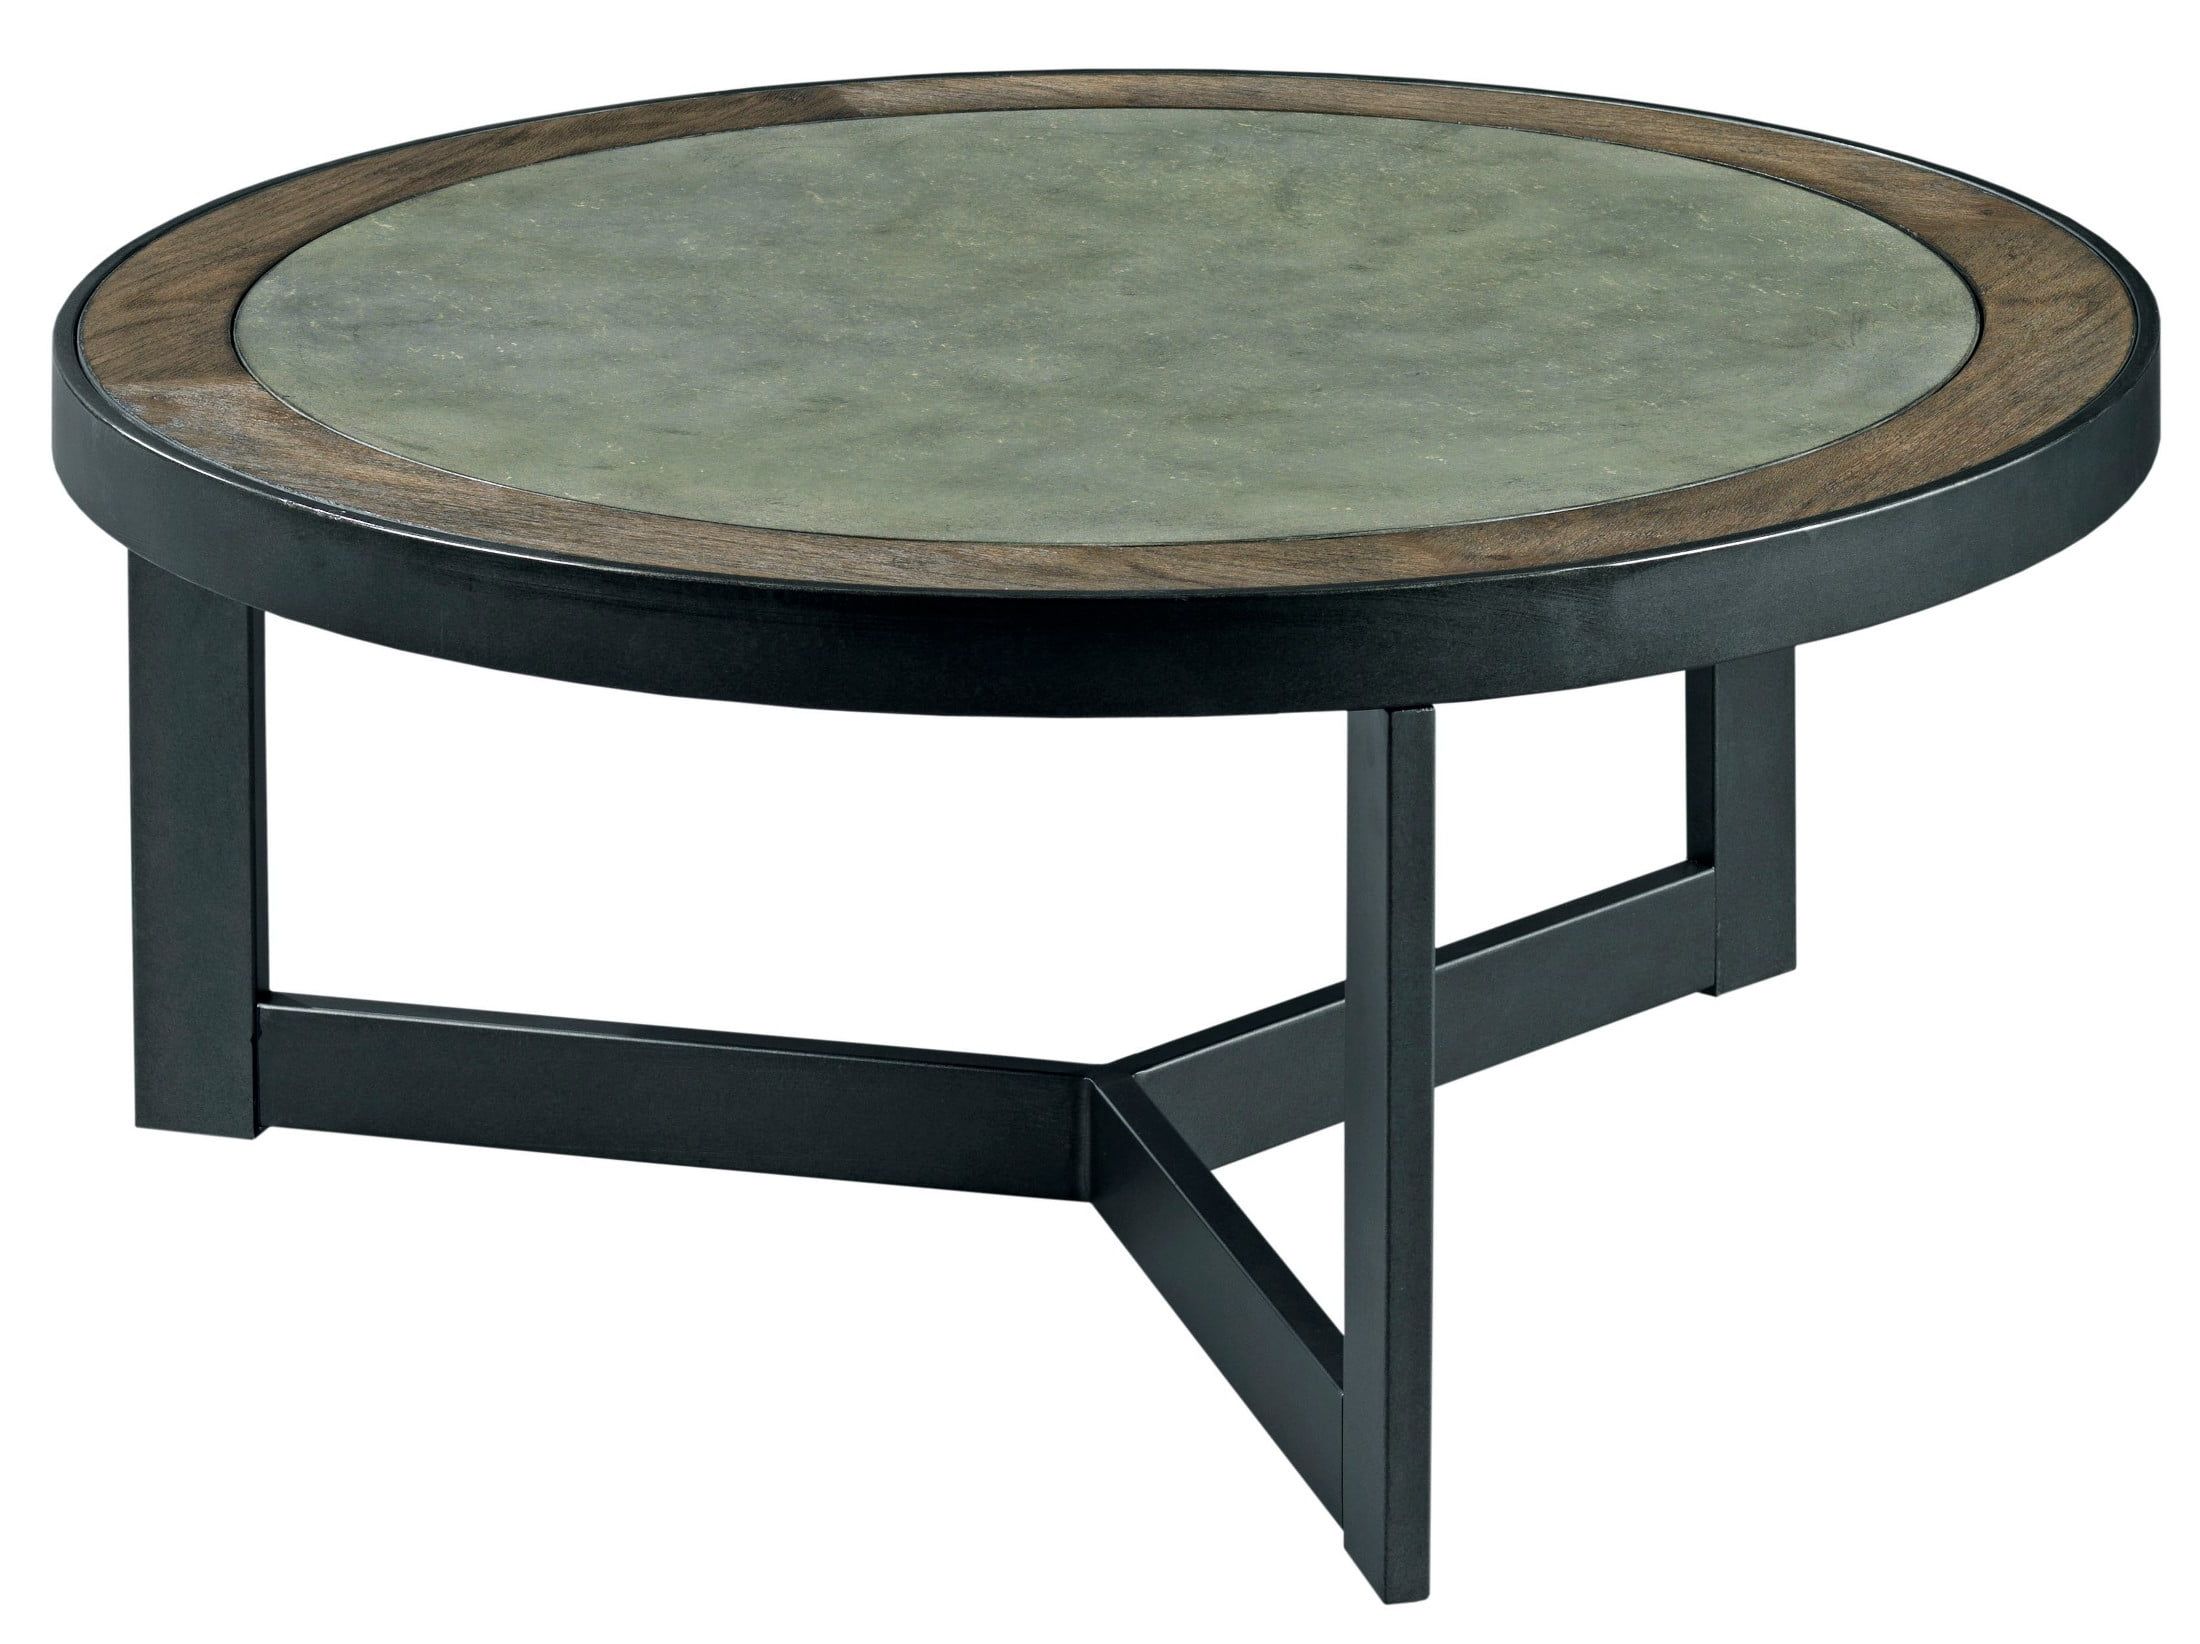 Popular Graystone Dark Oak Round Cocktail Table From Hammary In Barnside Round Cocktail Tables (View 16 of 20)